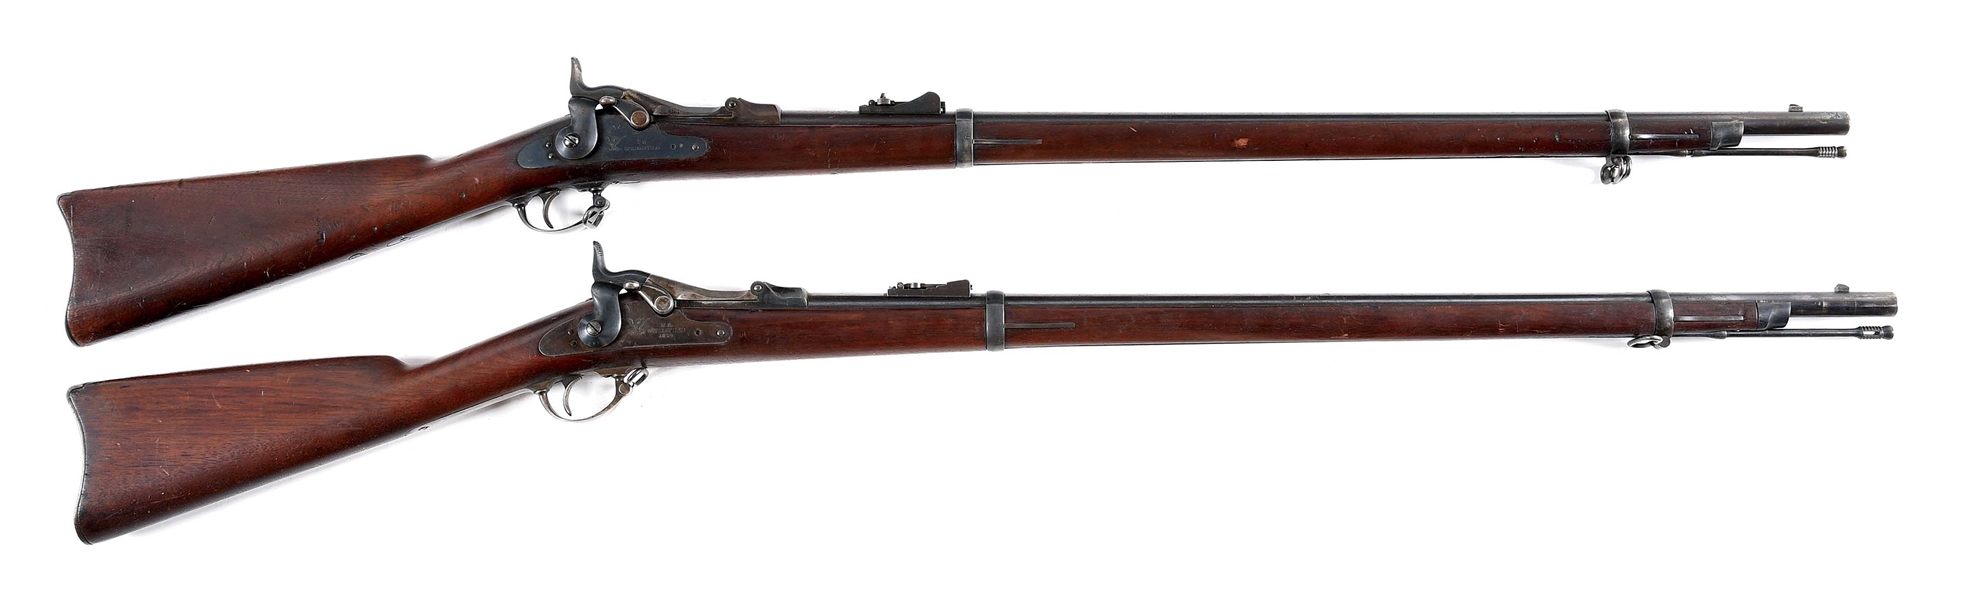 (A) COLLECTORS LOT OF TWO VERY EARLYS PRINGFIELD 1873 TRAPDOOR RIFLES.